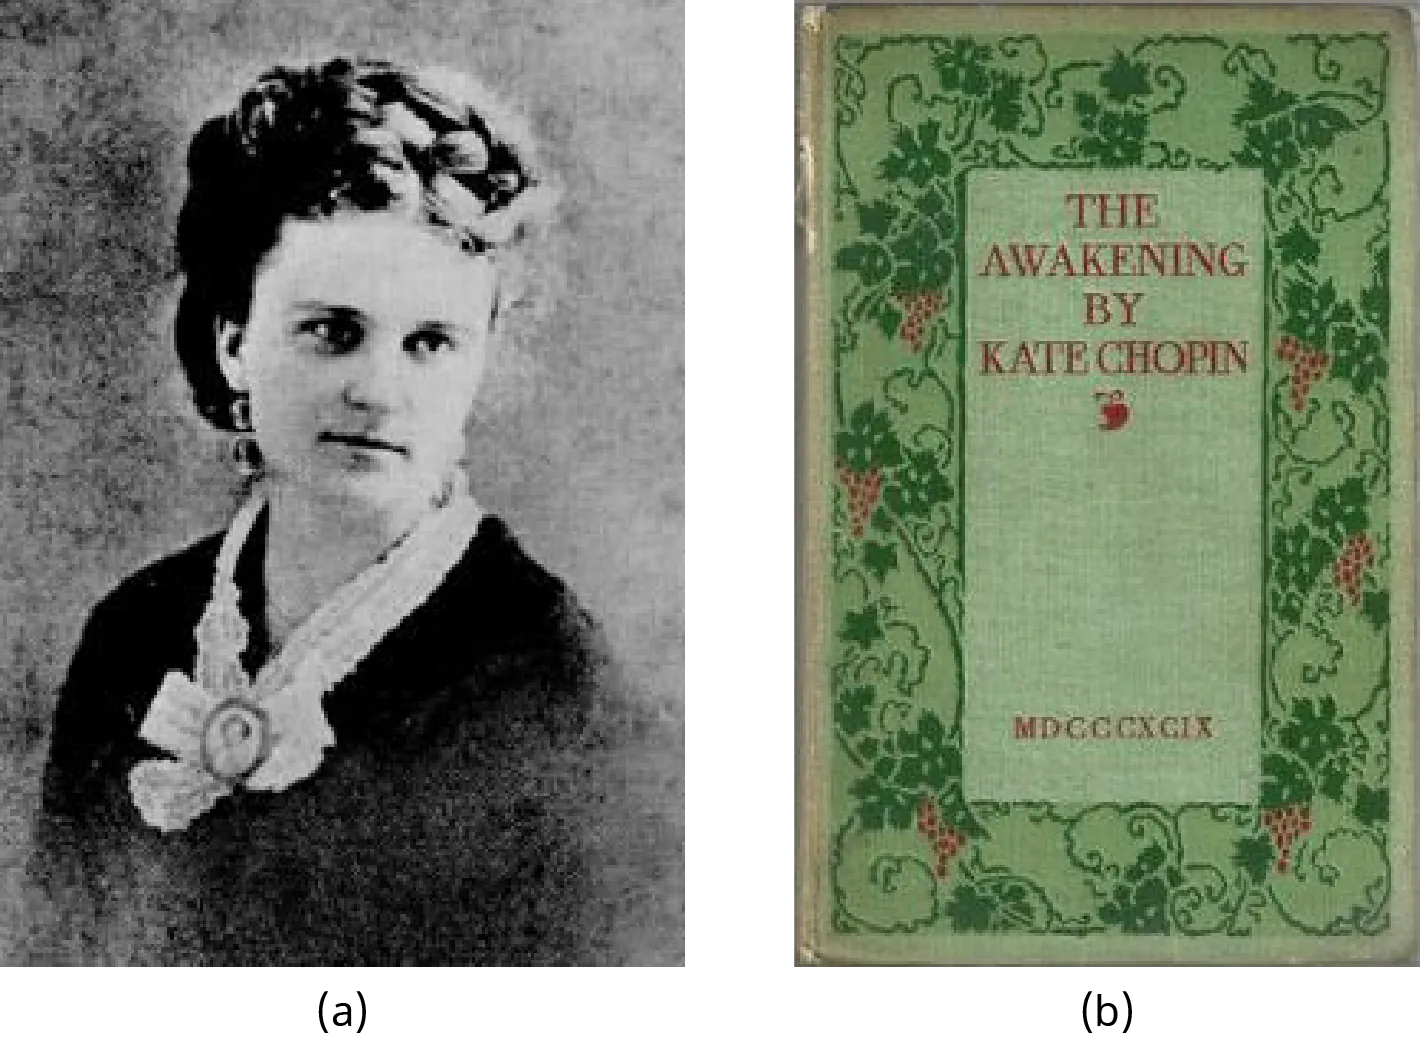 Photograph (a) is a portrait of Kate Chopin. Photograph (b) shows the first-edition cover of The Awakening.